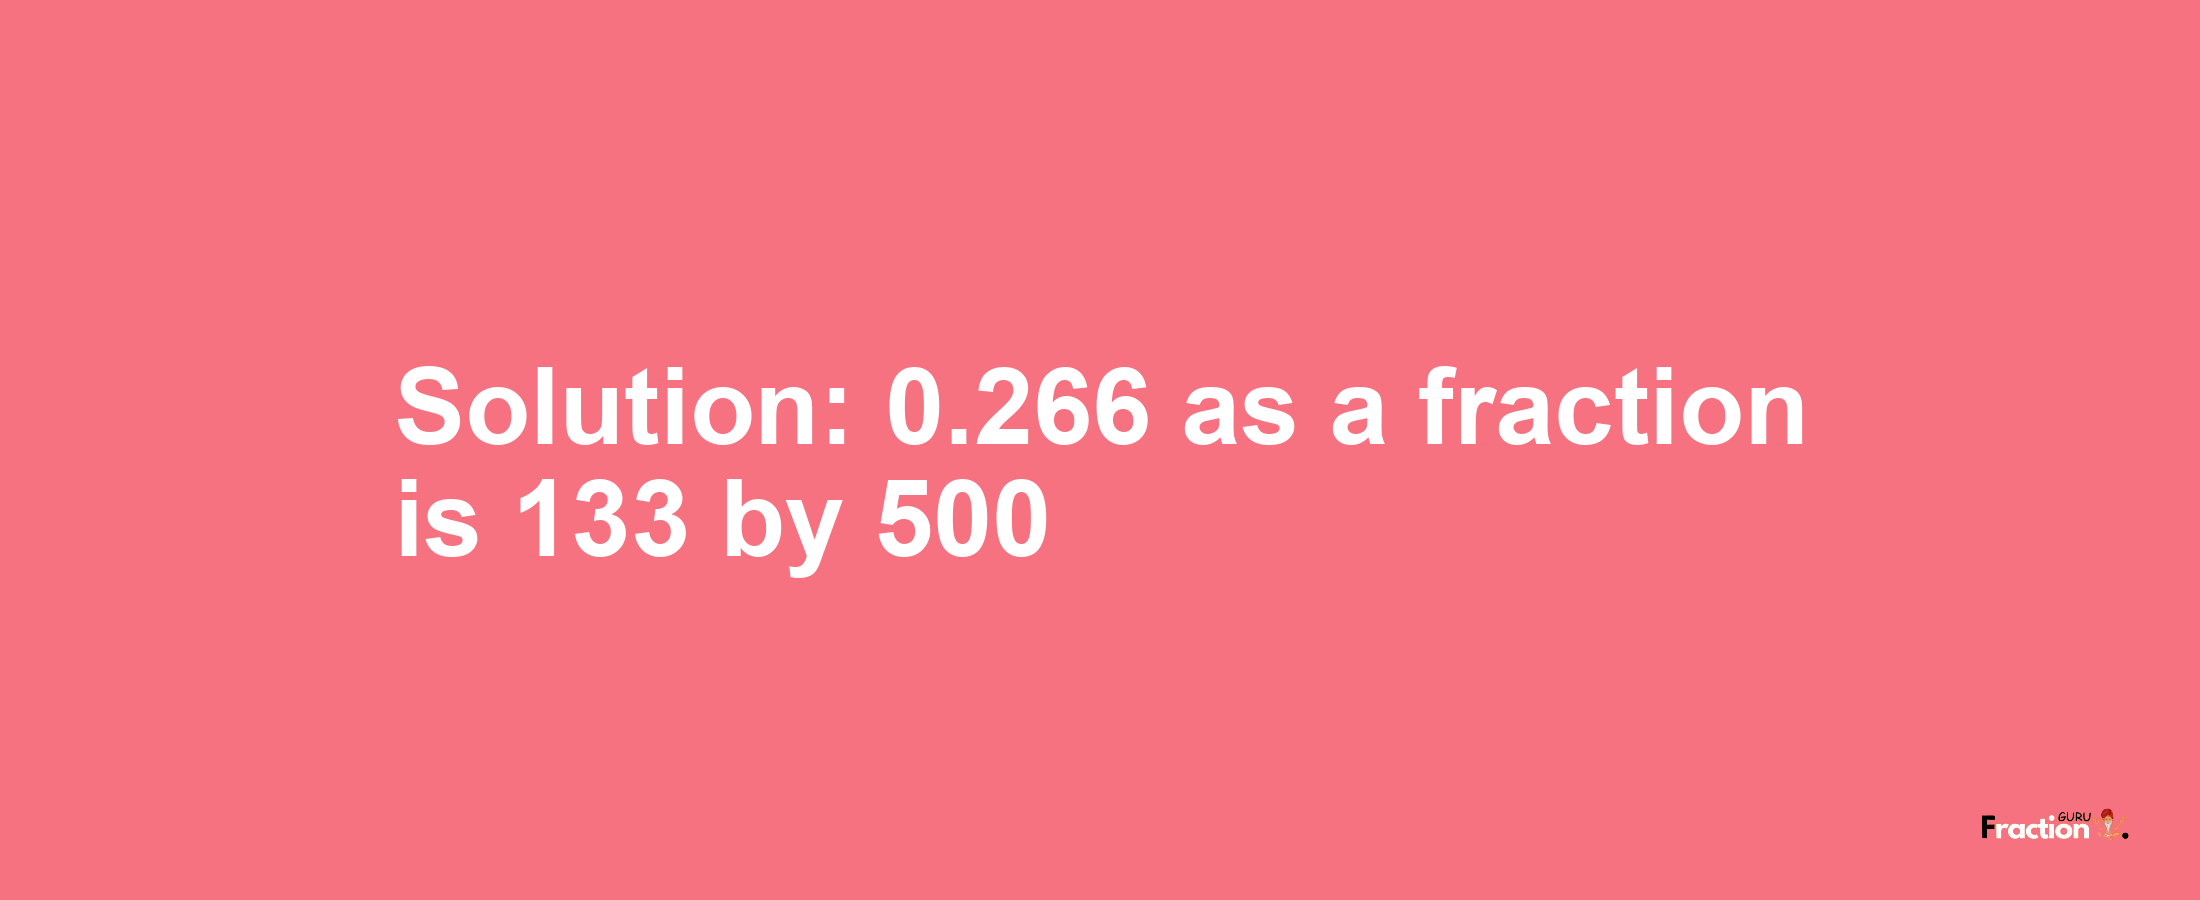 Solution:0.266 as a fraction is 133/500